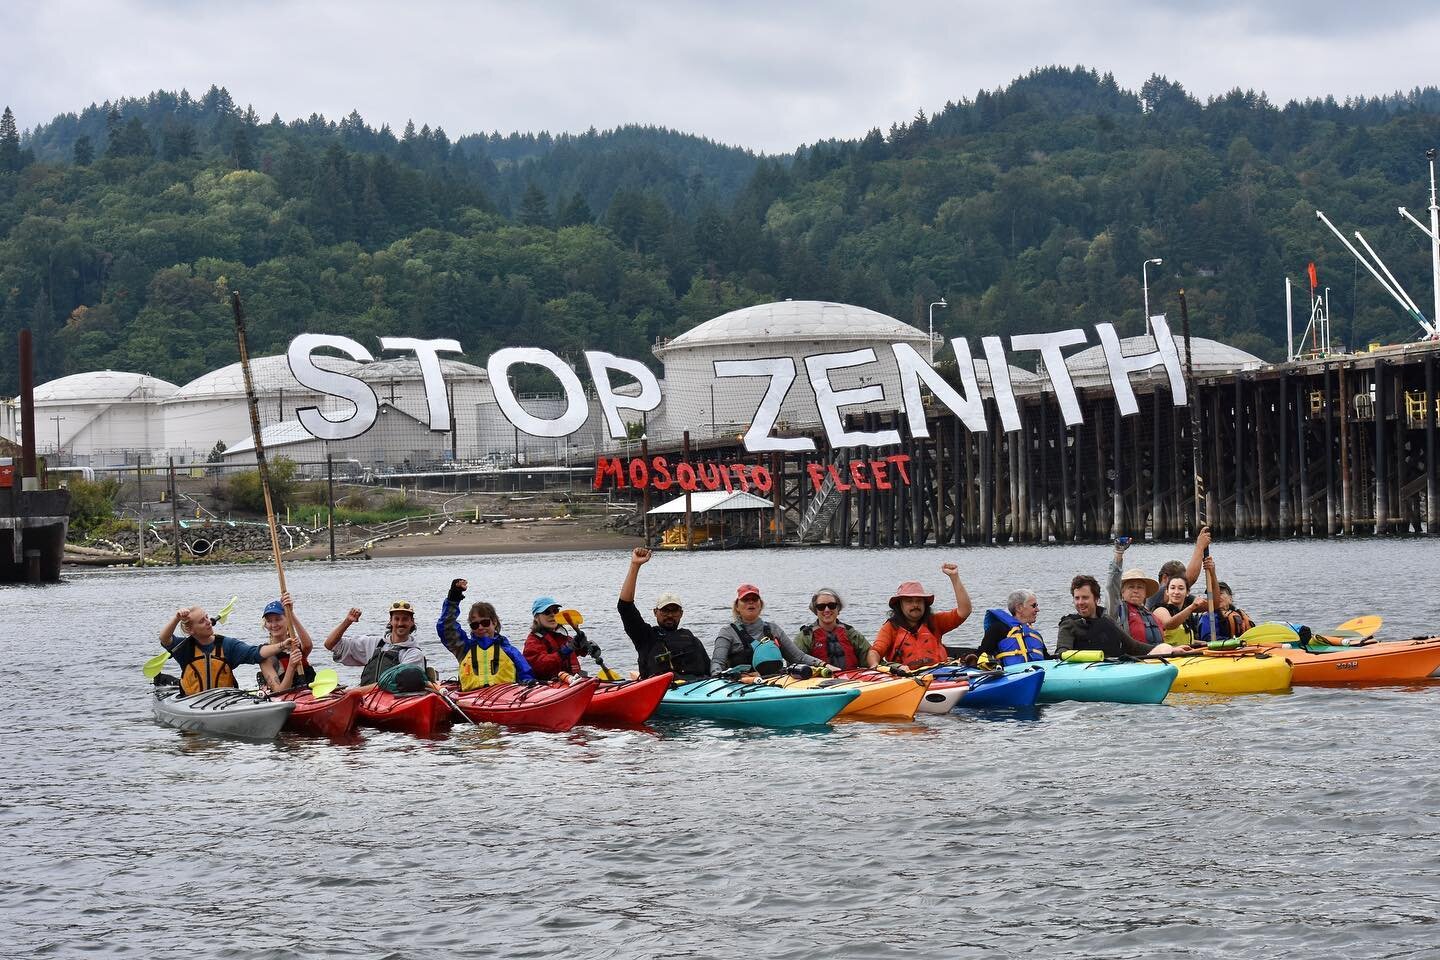 In case you missed it over the long weekend, here are more pics from the on-water action against local fossil fuel villain Zenith Energy on Sunday! Thanks to @bodhidelbarrio and @adahrae11 for these fantastic photos. And shout out to the Mosquito Fle